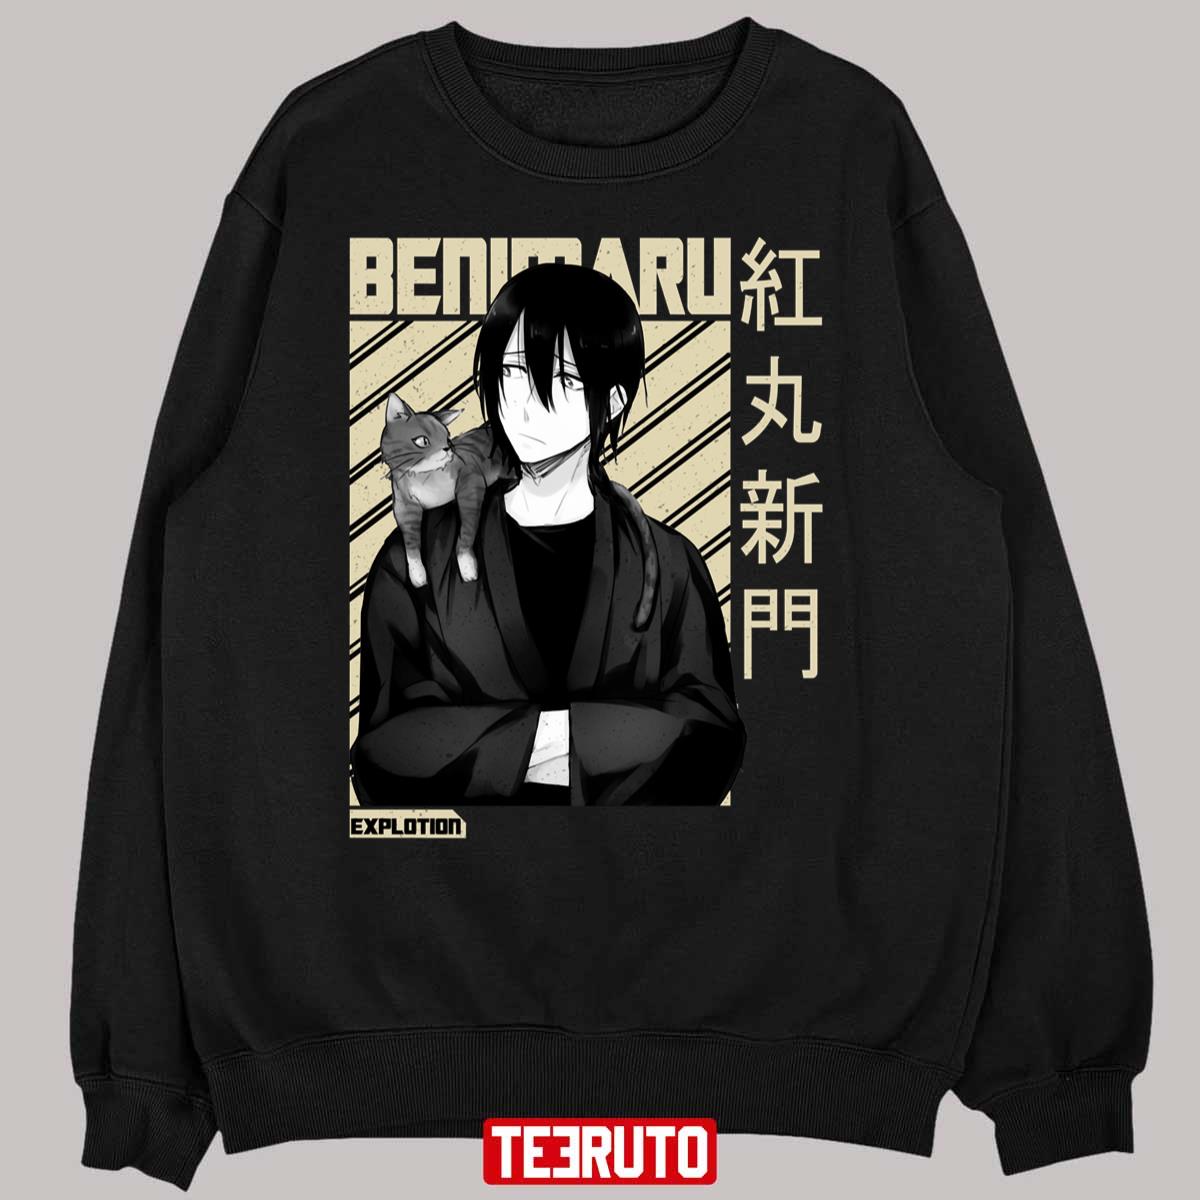 Your Go-To Fire Force Store for Anime Swag